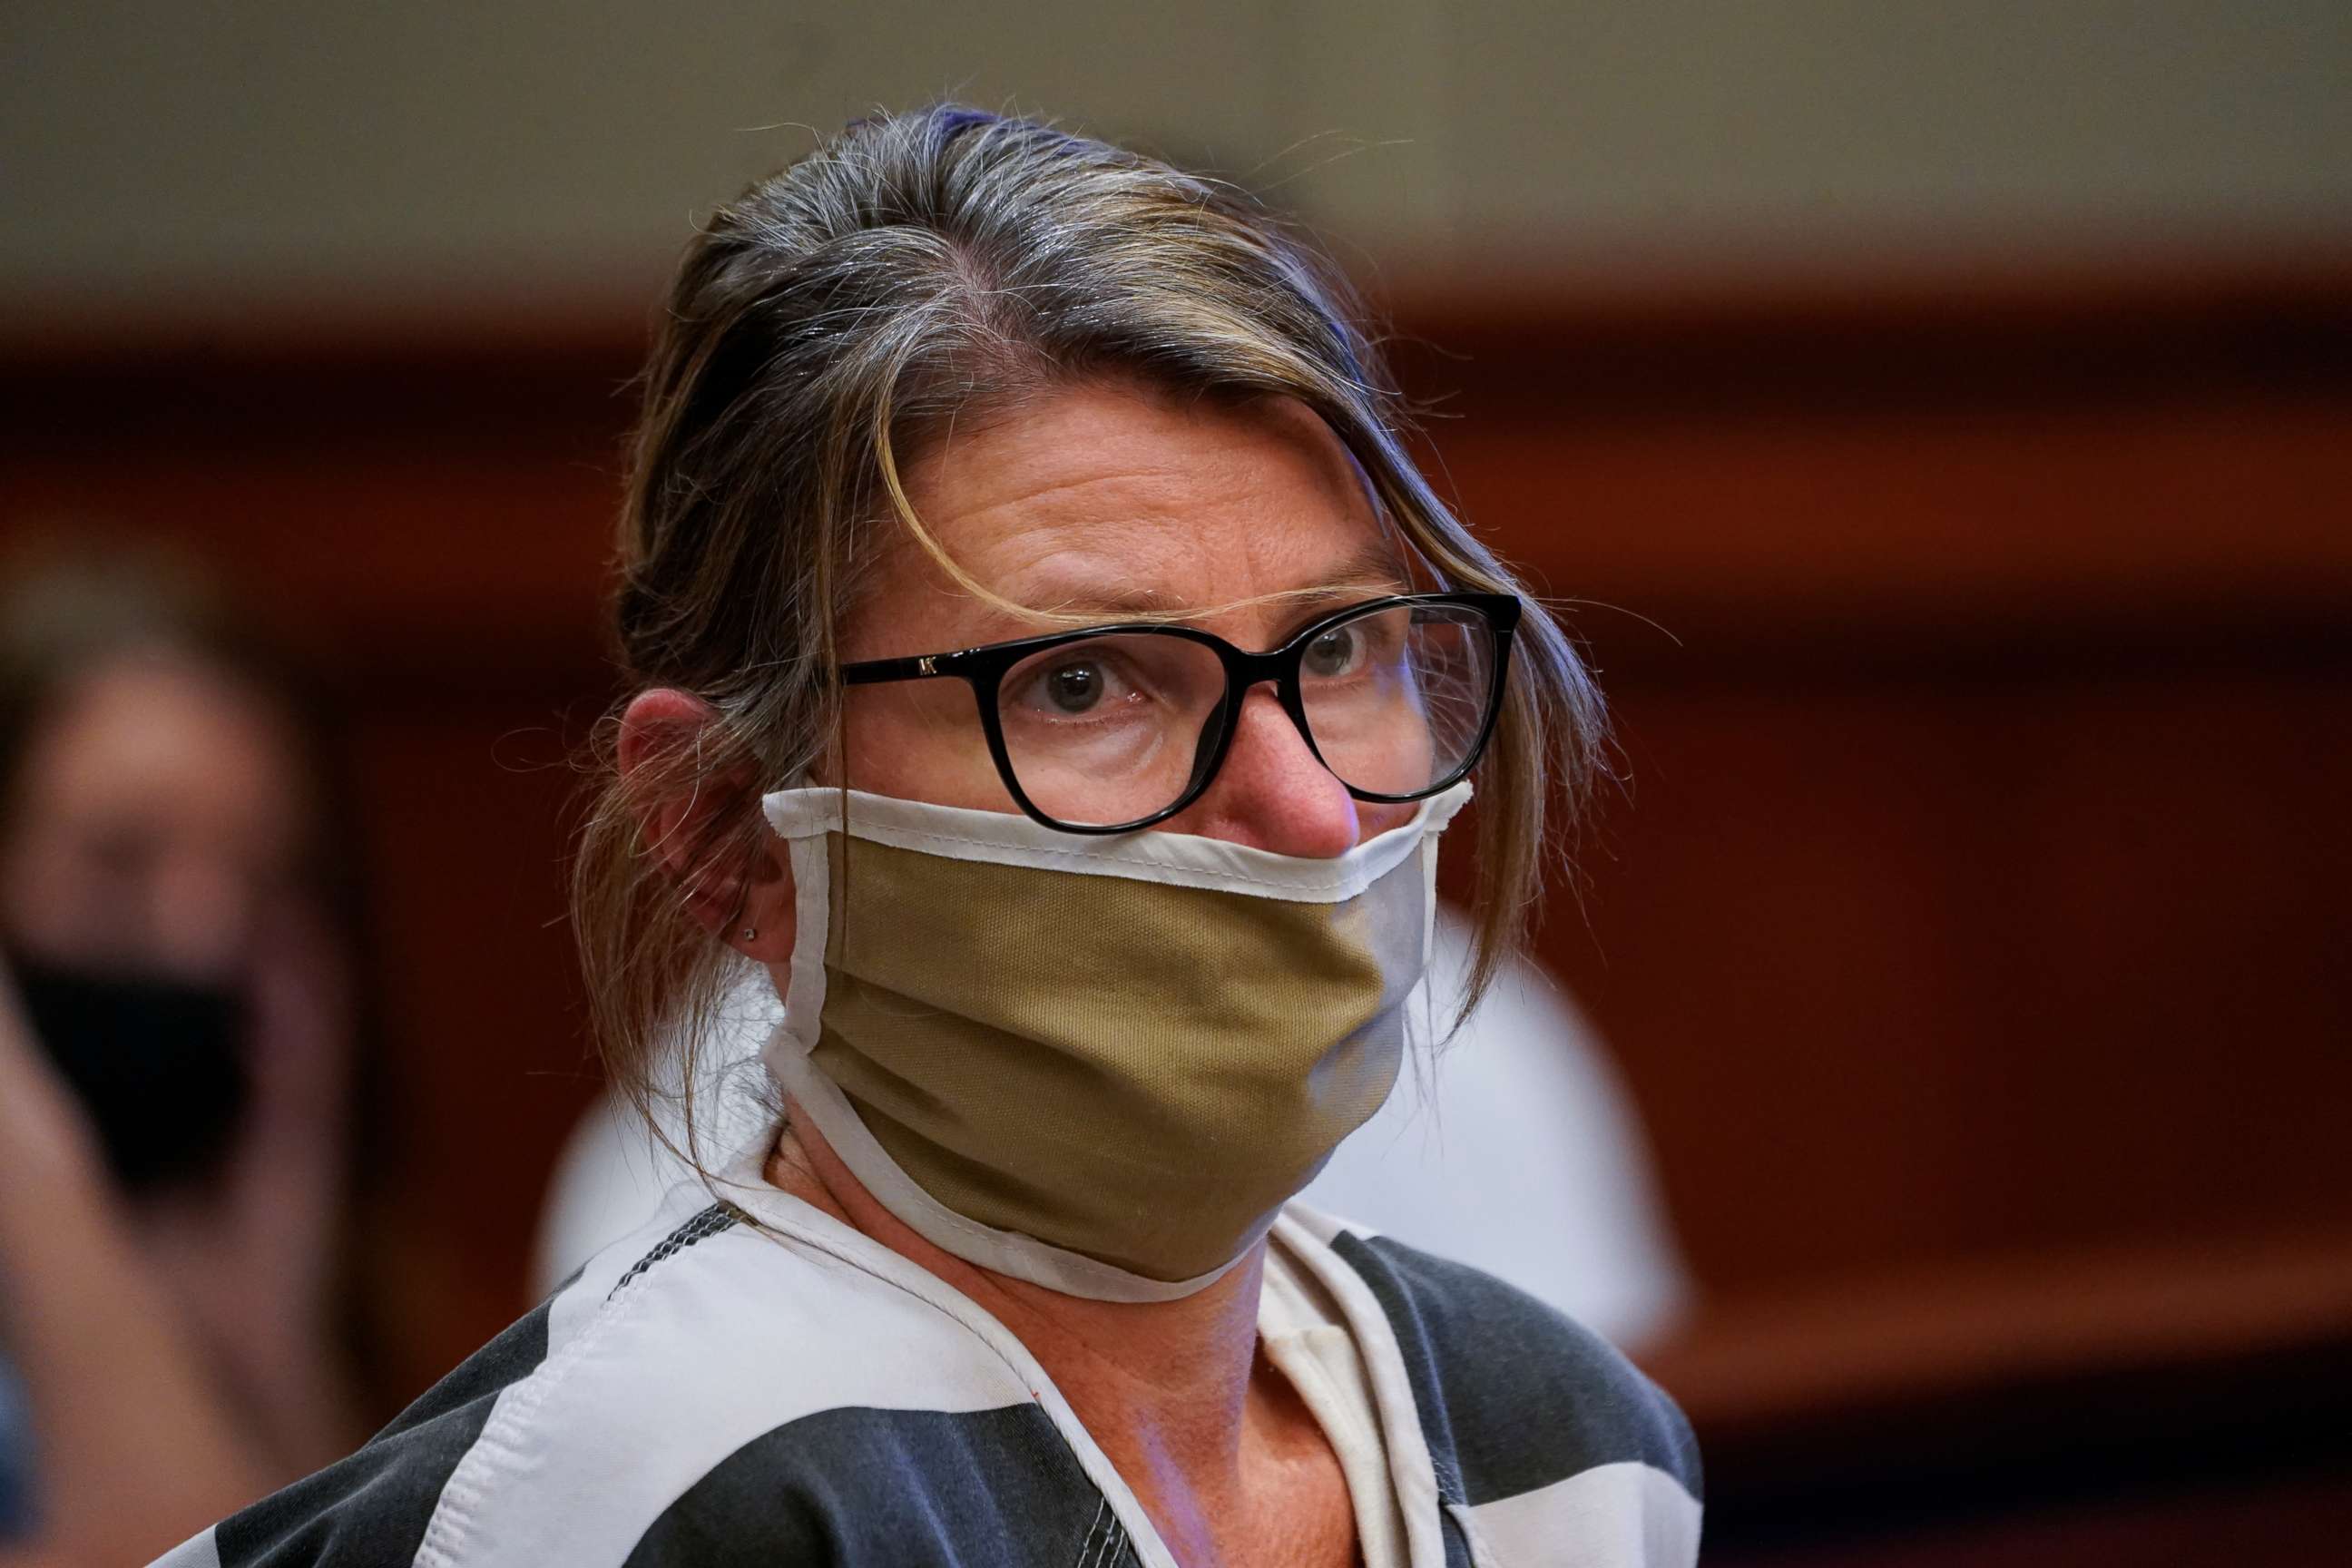 PHOTO: Jennifer Crumbley, the mother of Ethan Crumbley, a teenager accused of killing four students in a shooting at Oxford High School, appears during a preliminary examination on involuntary manslaughter charge in Rochester Hills, Mich., Feb. 8, 2022.